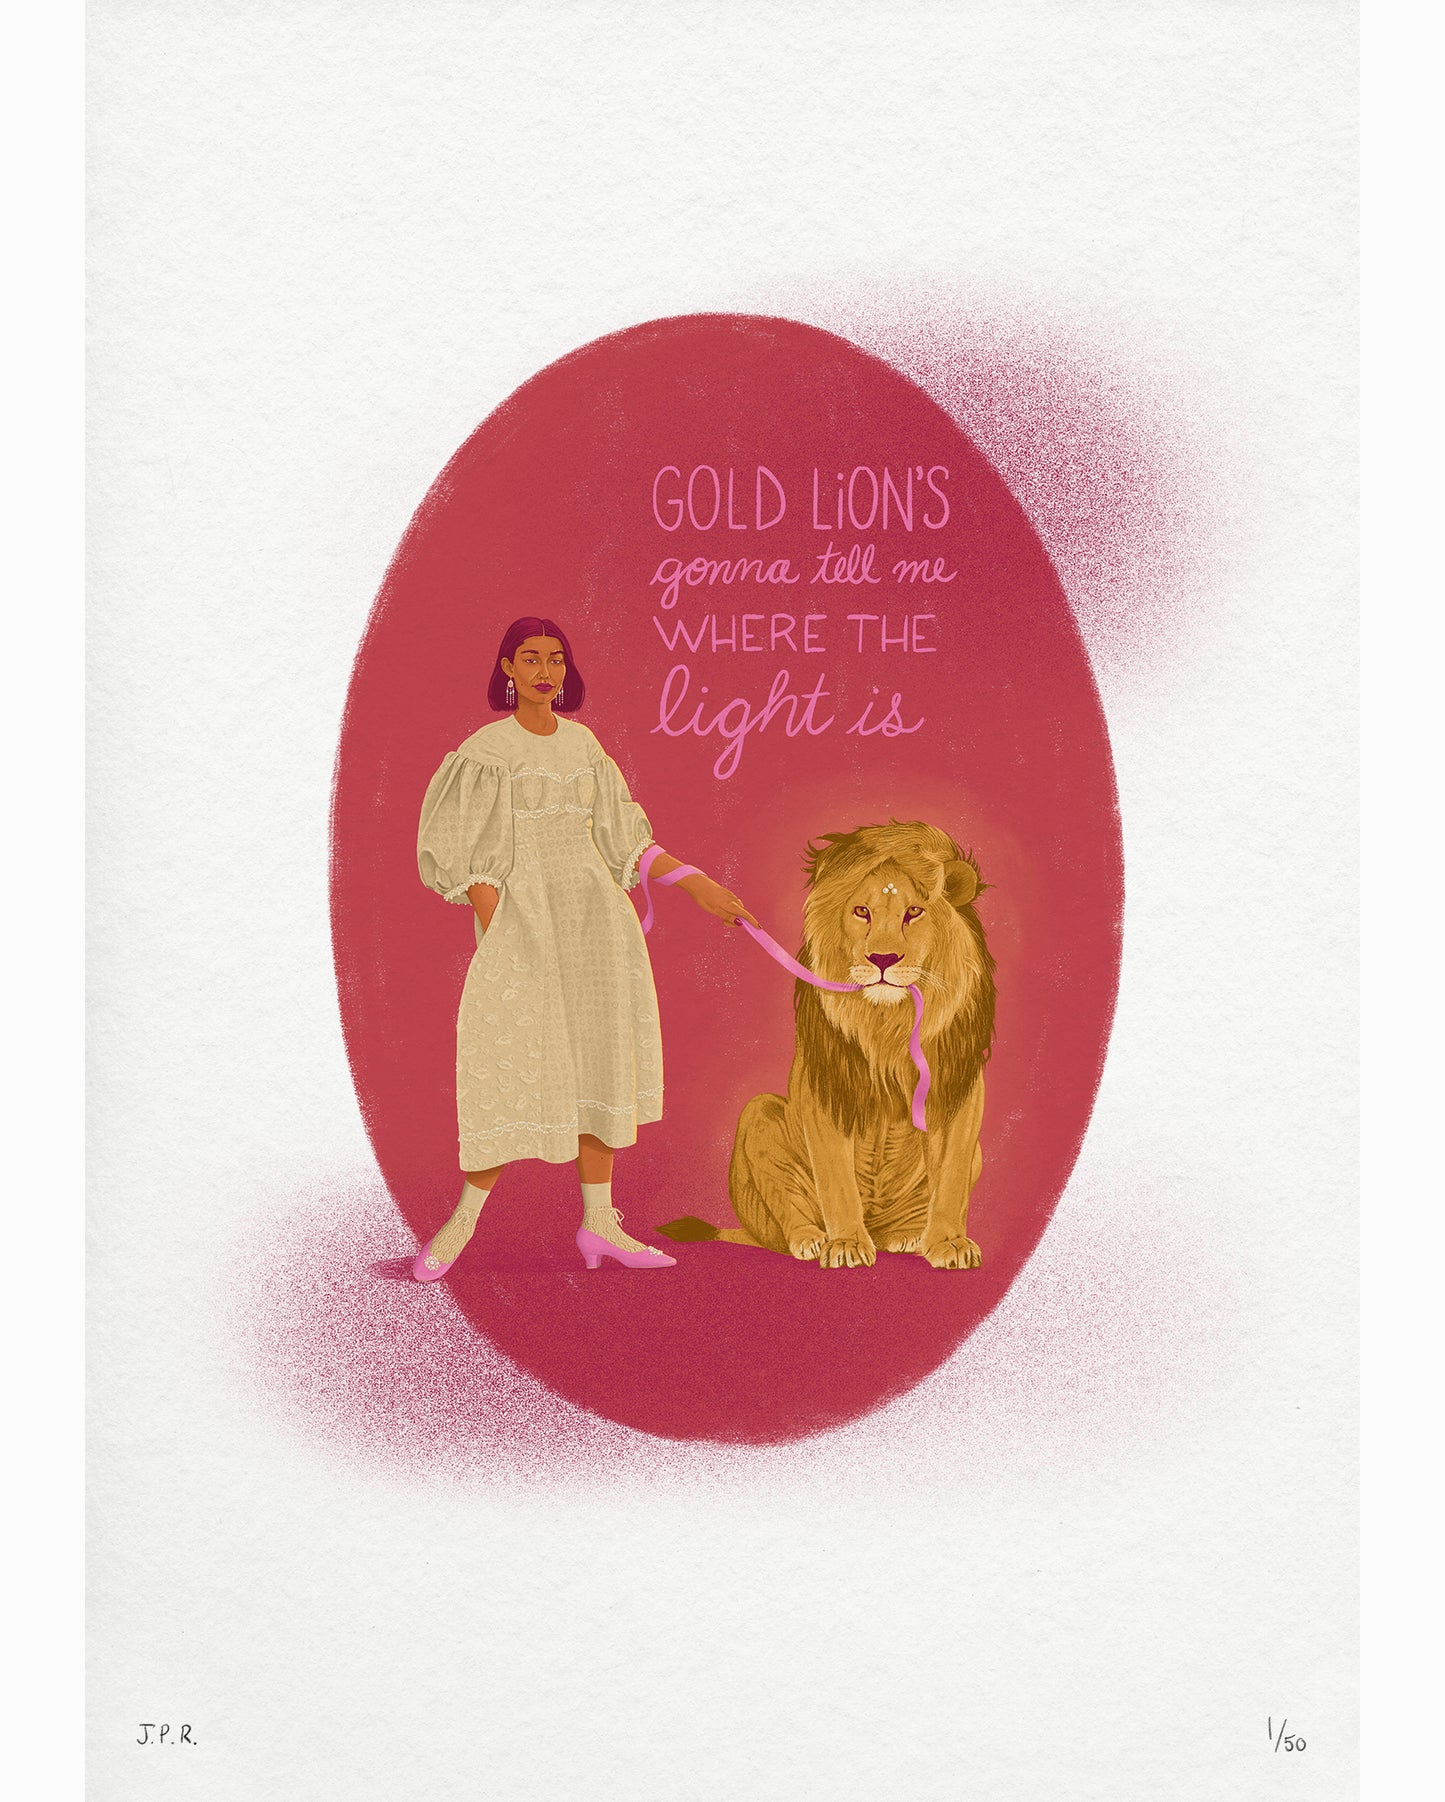 Illustration of a South Asian woman next to a golden lion. She is wearing and off-white dress covered with pearls. Lyrics from the Yeah Yeah Yeah song Gold Lion are written at the backL "Gold Lion's gonna tell me where the light is."